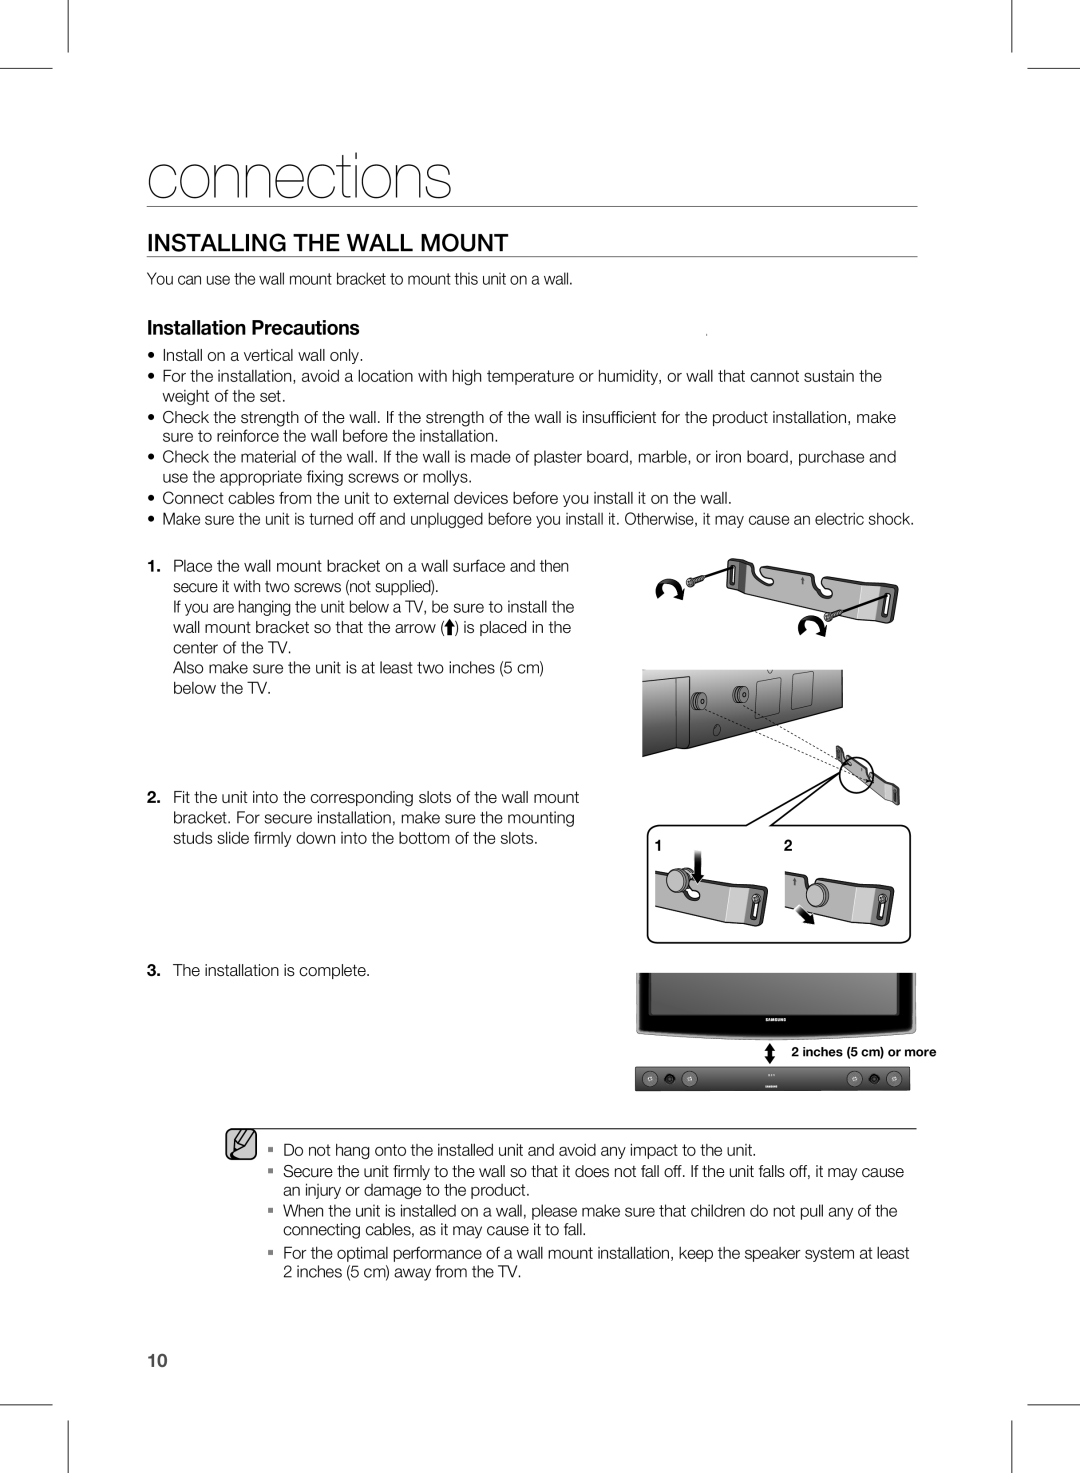 Samsung HW-E450 user manual connections, INSTAllING THE WAll MOUNT, Installation Precautions 